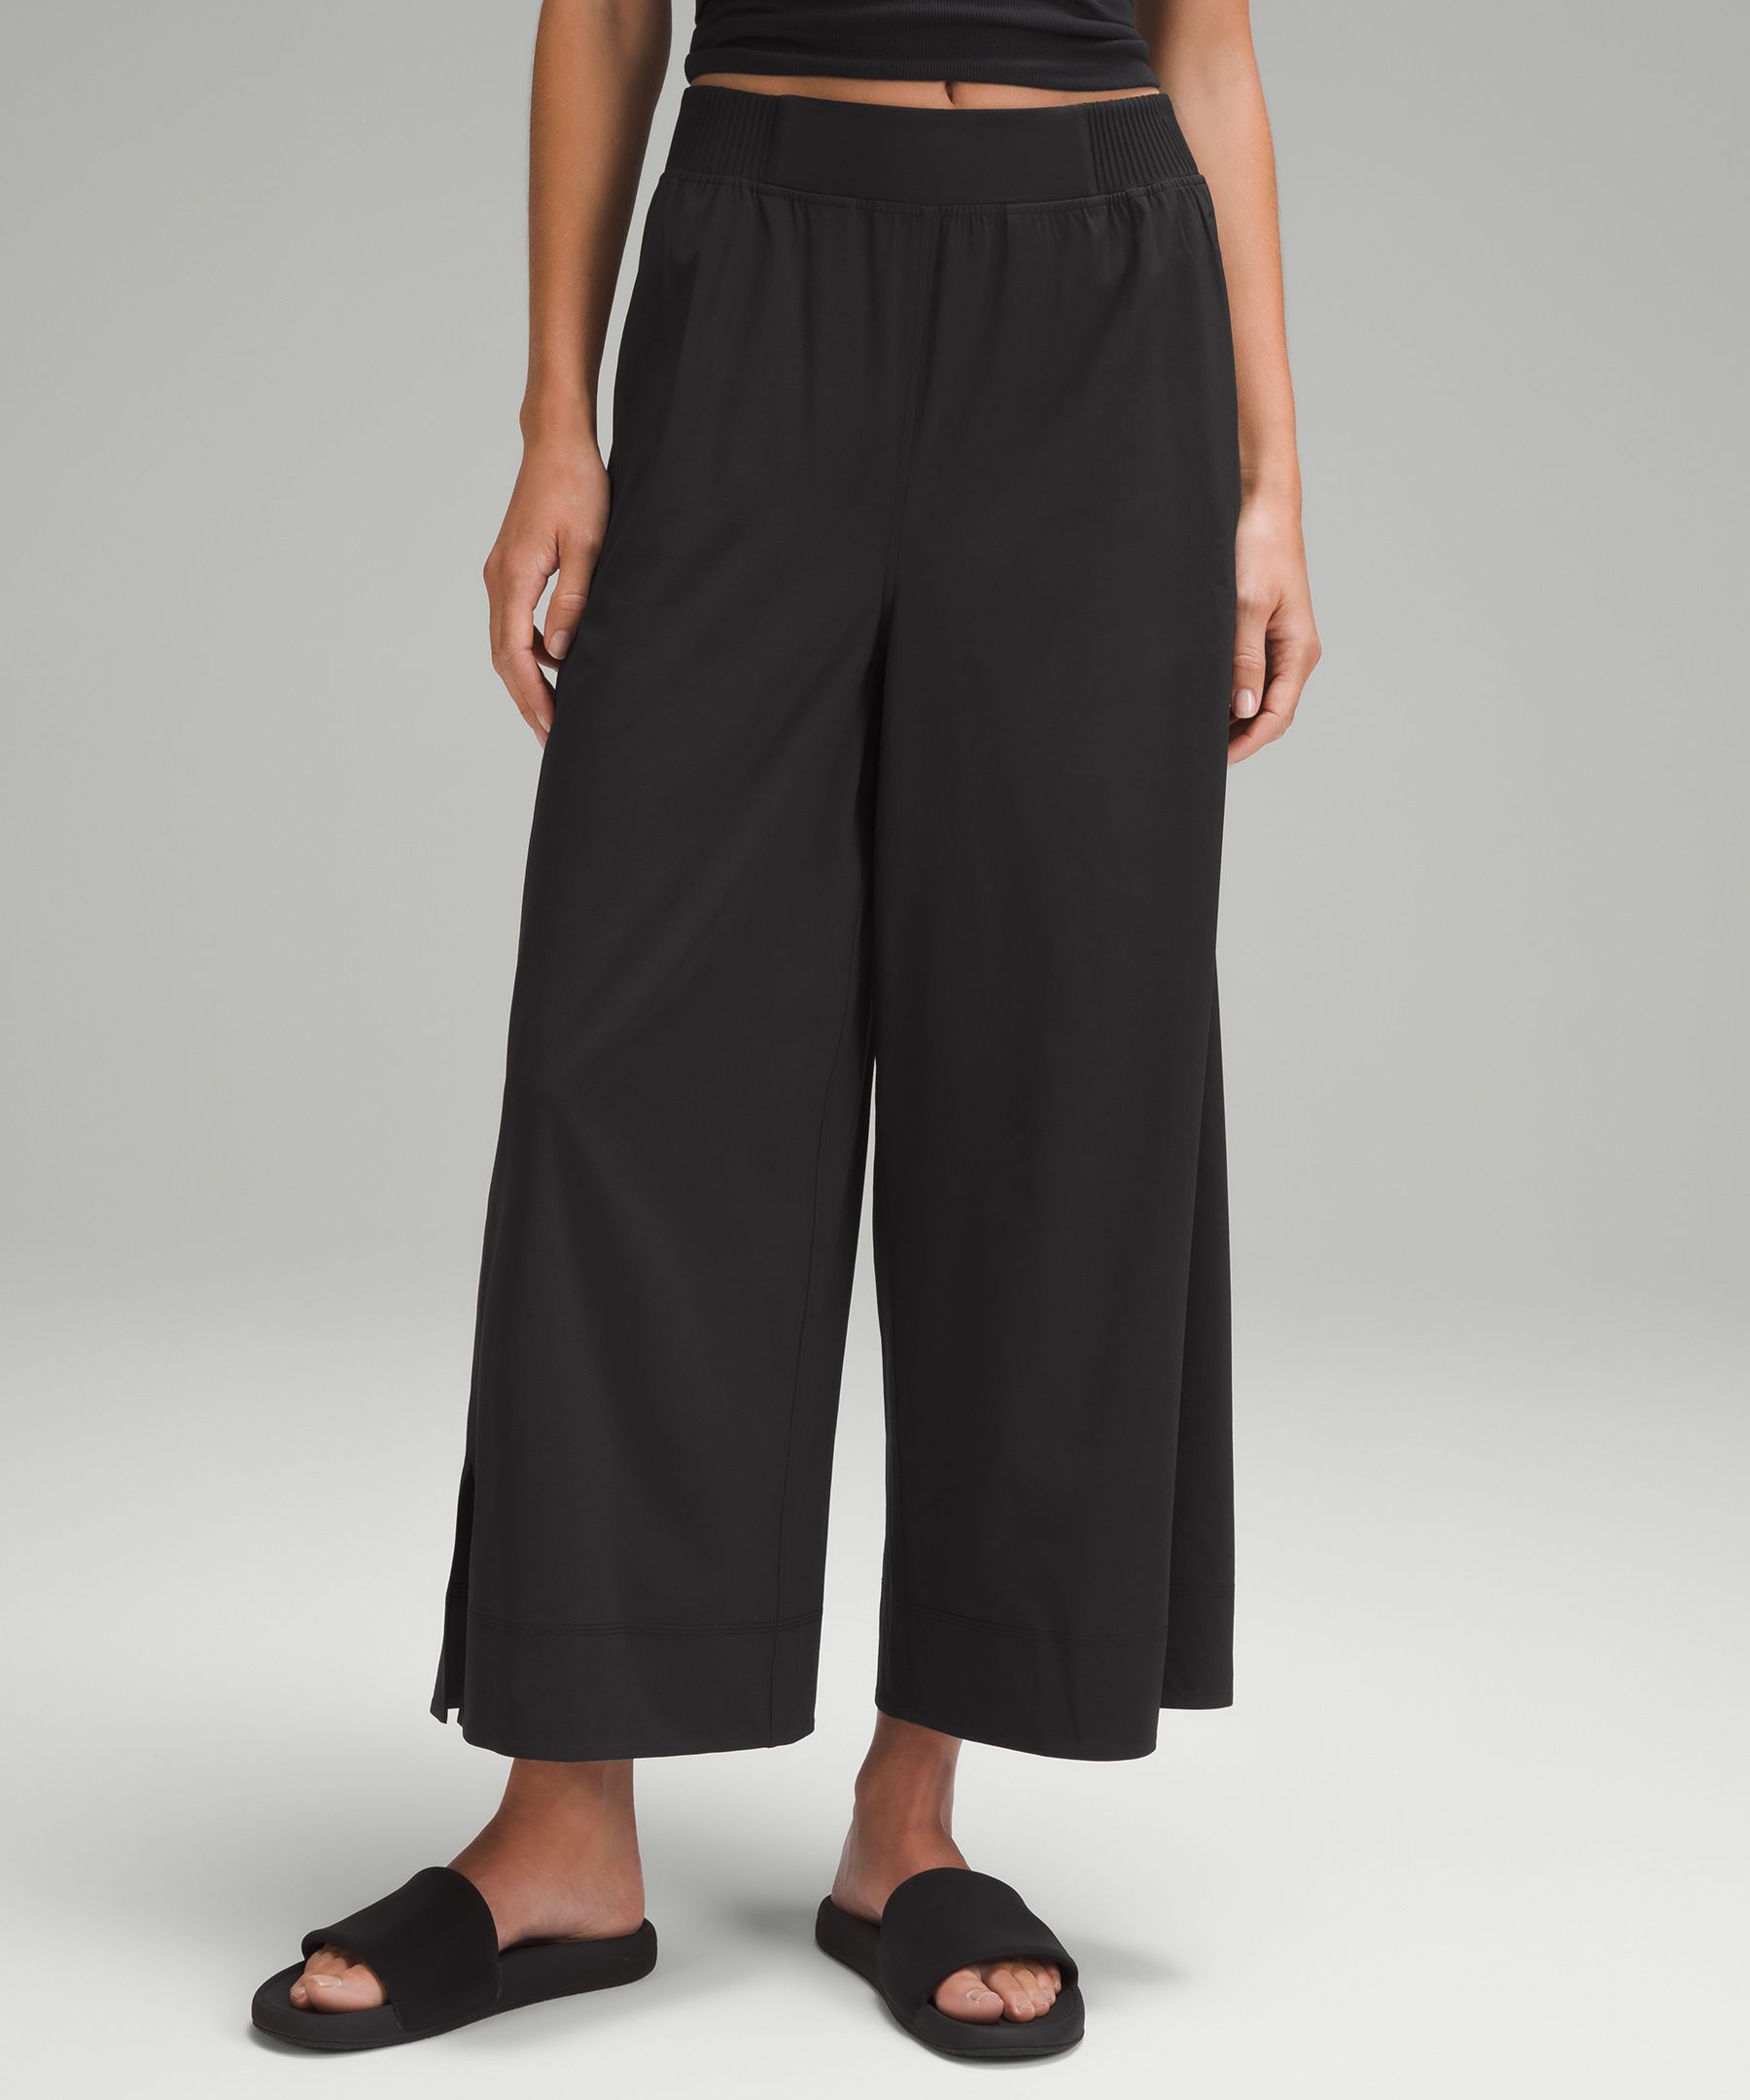 Stretch woven wide leg cropped pants, perfect for my 5'5” legs 🖤 : r/ lululemon